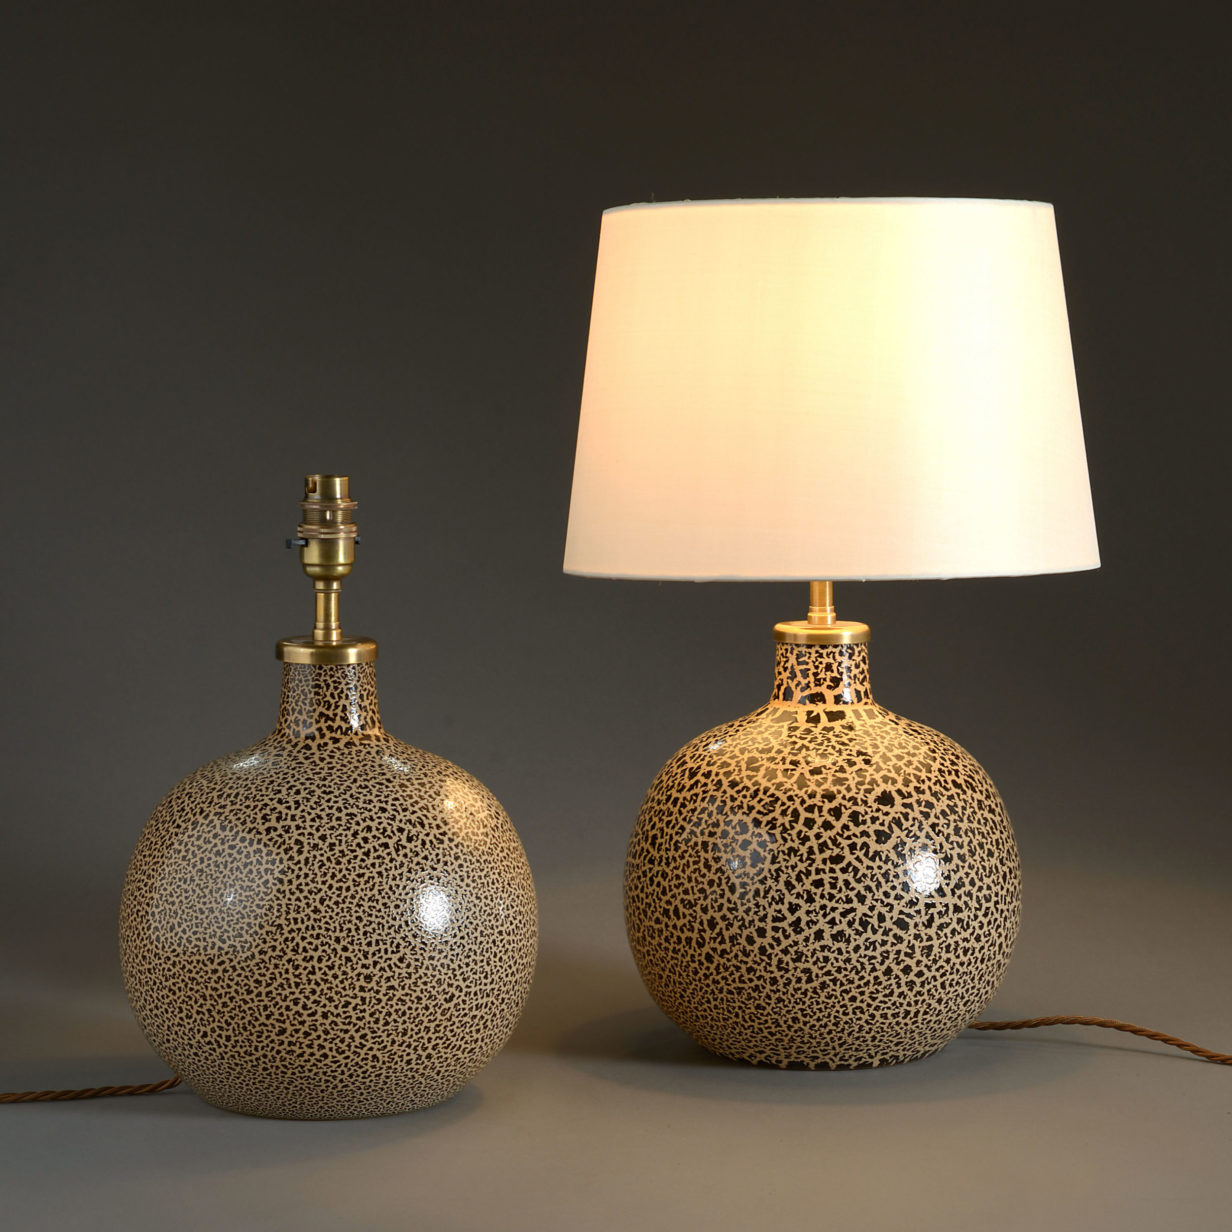 A pair of mid-century glass lamp bases